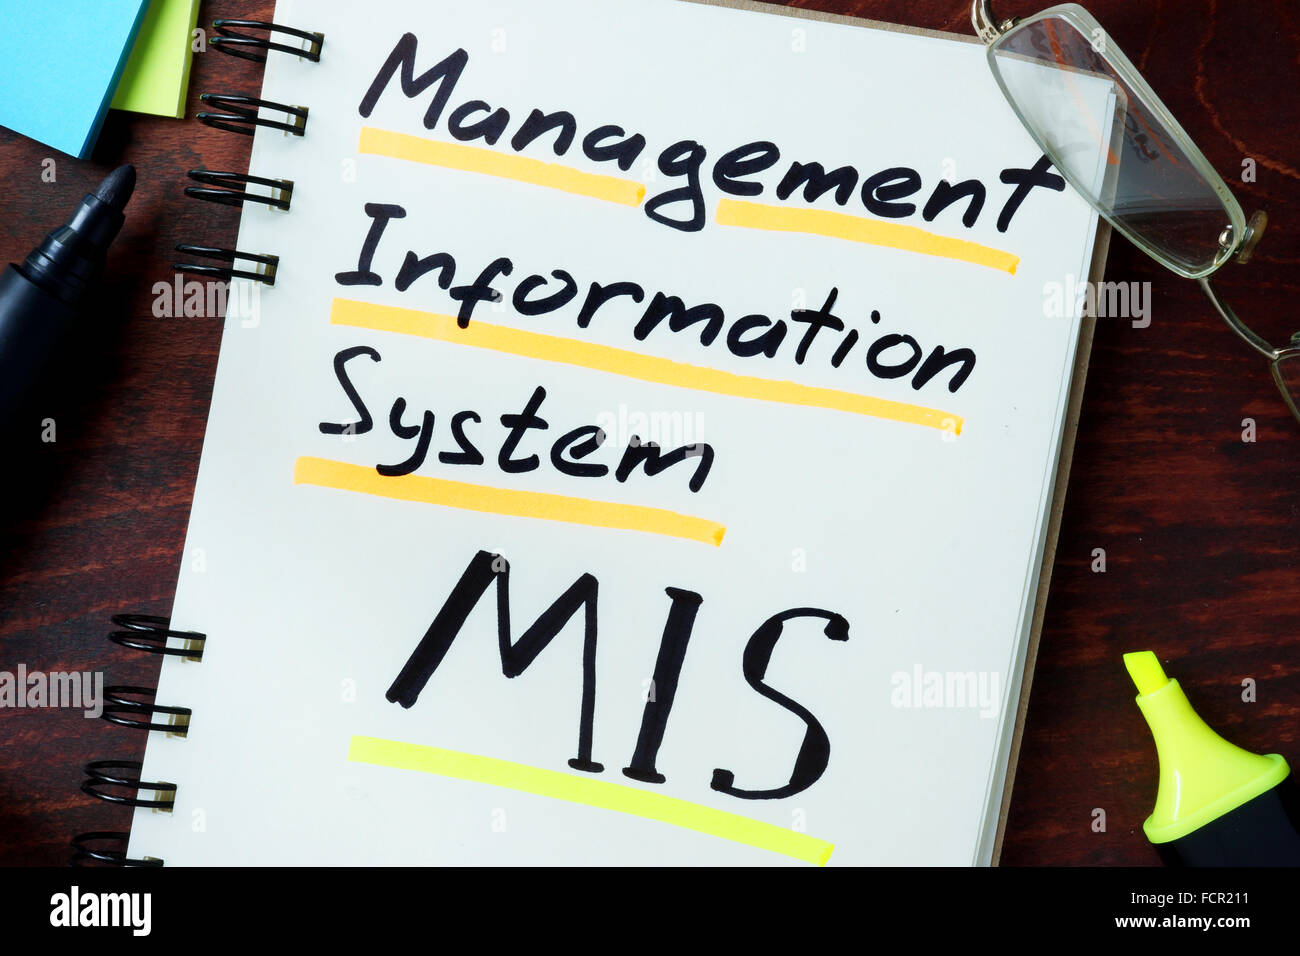 Notepad with Management information system MIS on the wooden table. Stock Photo